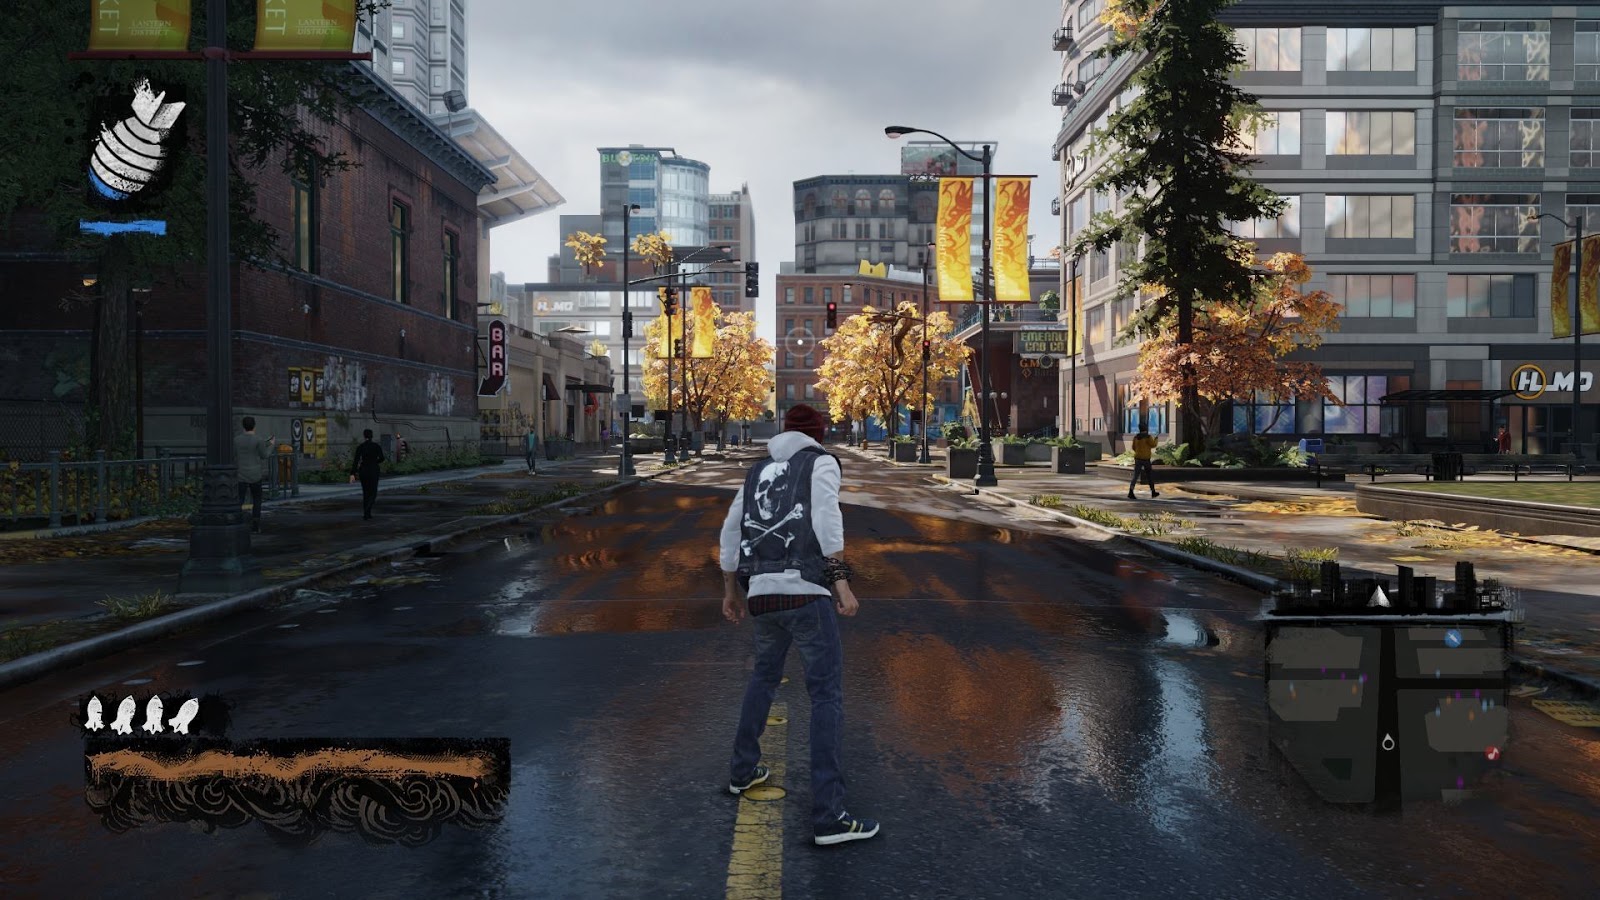 where to download watch dogs 2 torrent